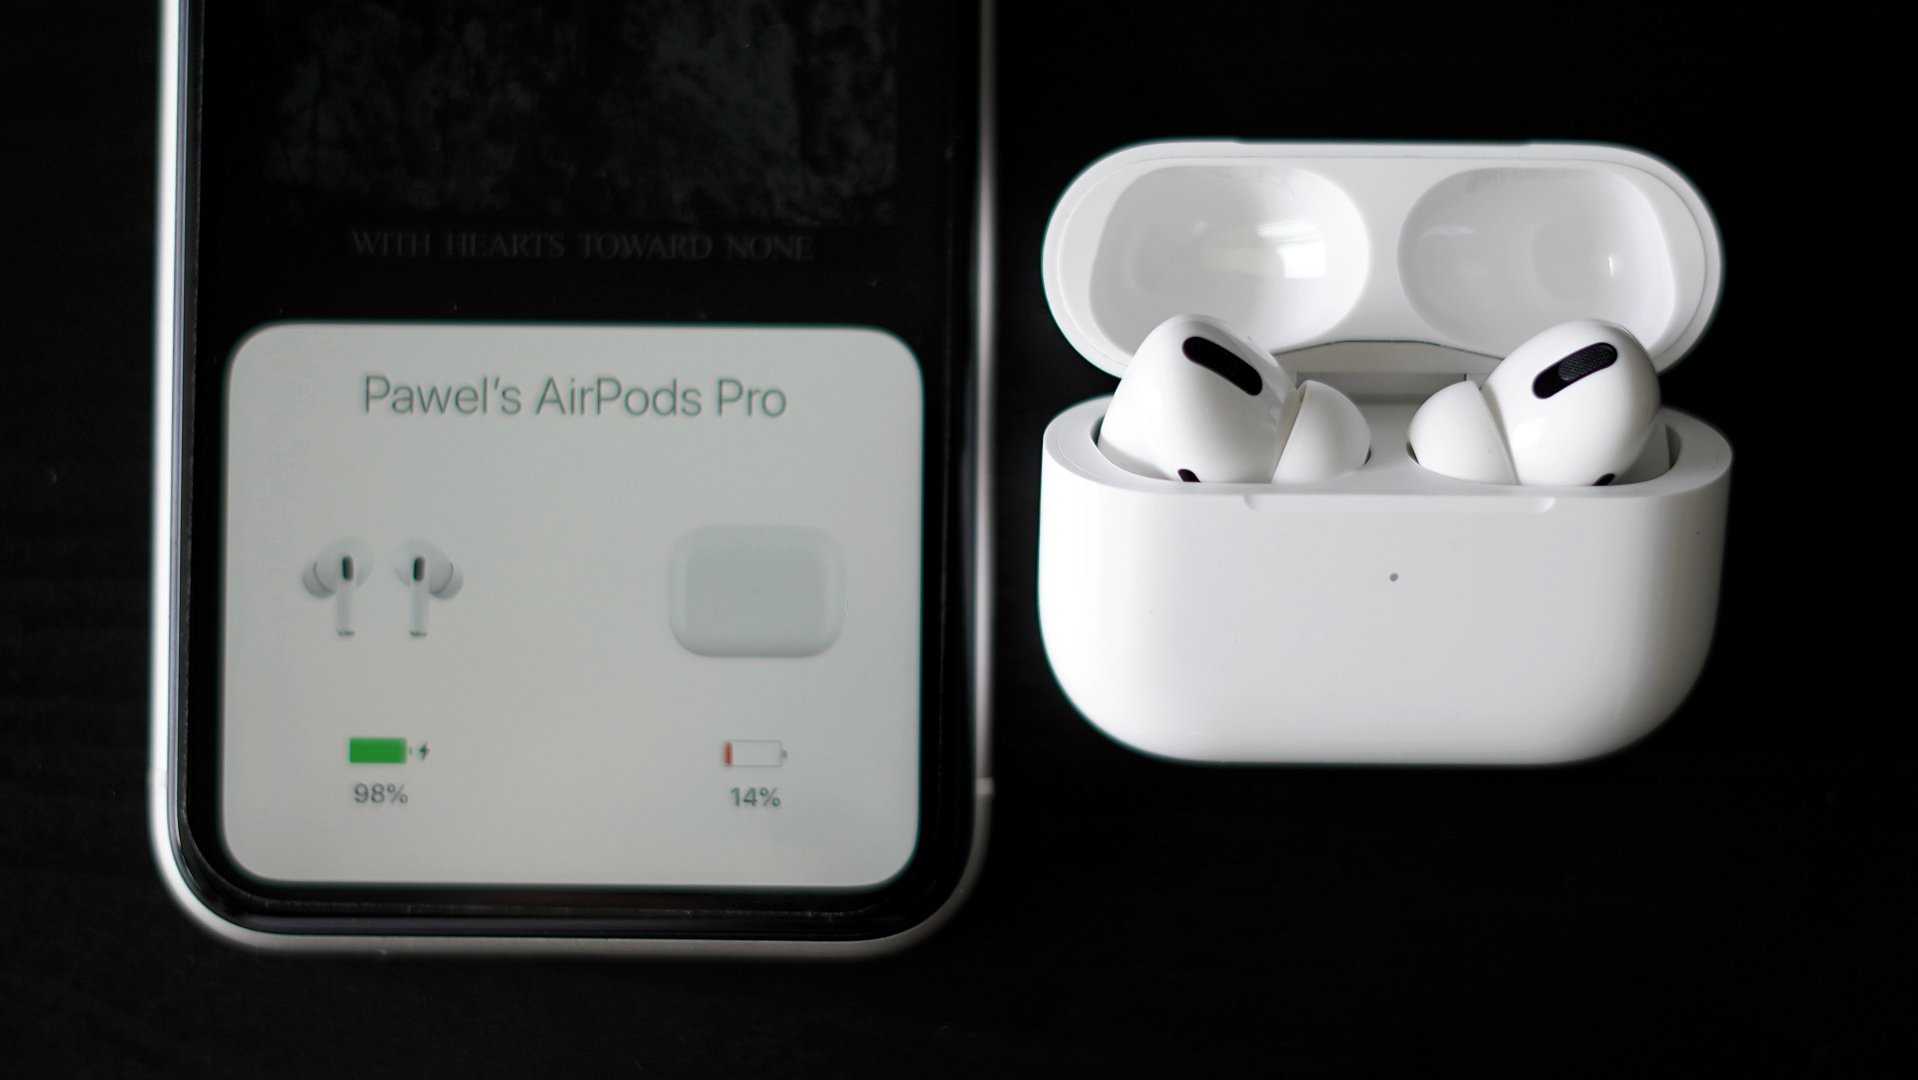 Airpods 3 1. Наушники AIRPODS Pro 3. Apple AIRPODS Pro 2022. Наушники TWS Apple AIRPODS Pro 2 белый. Apple AIRPODS 3 (mme73zm/a).